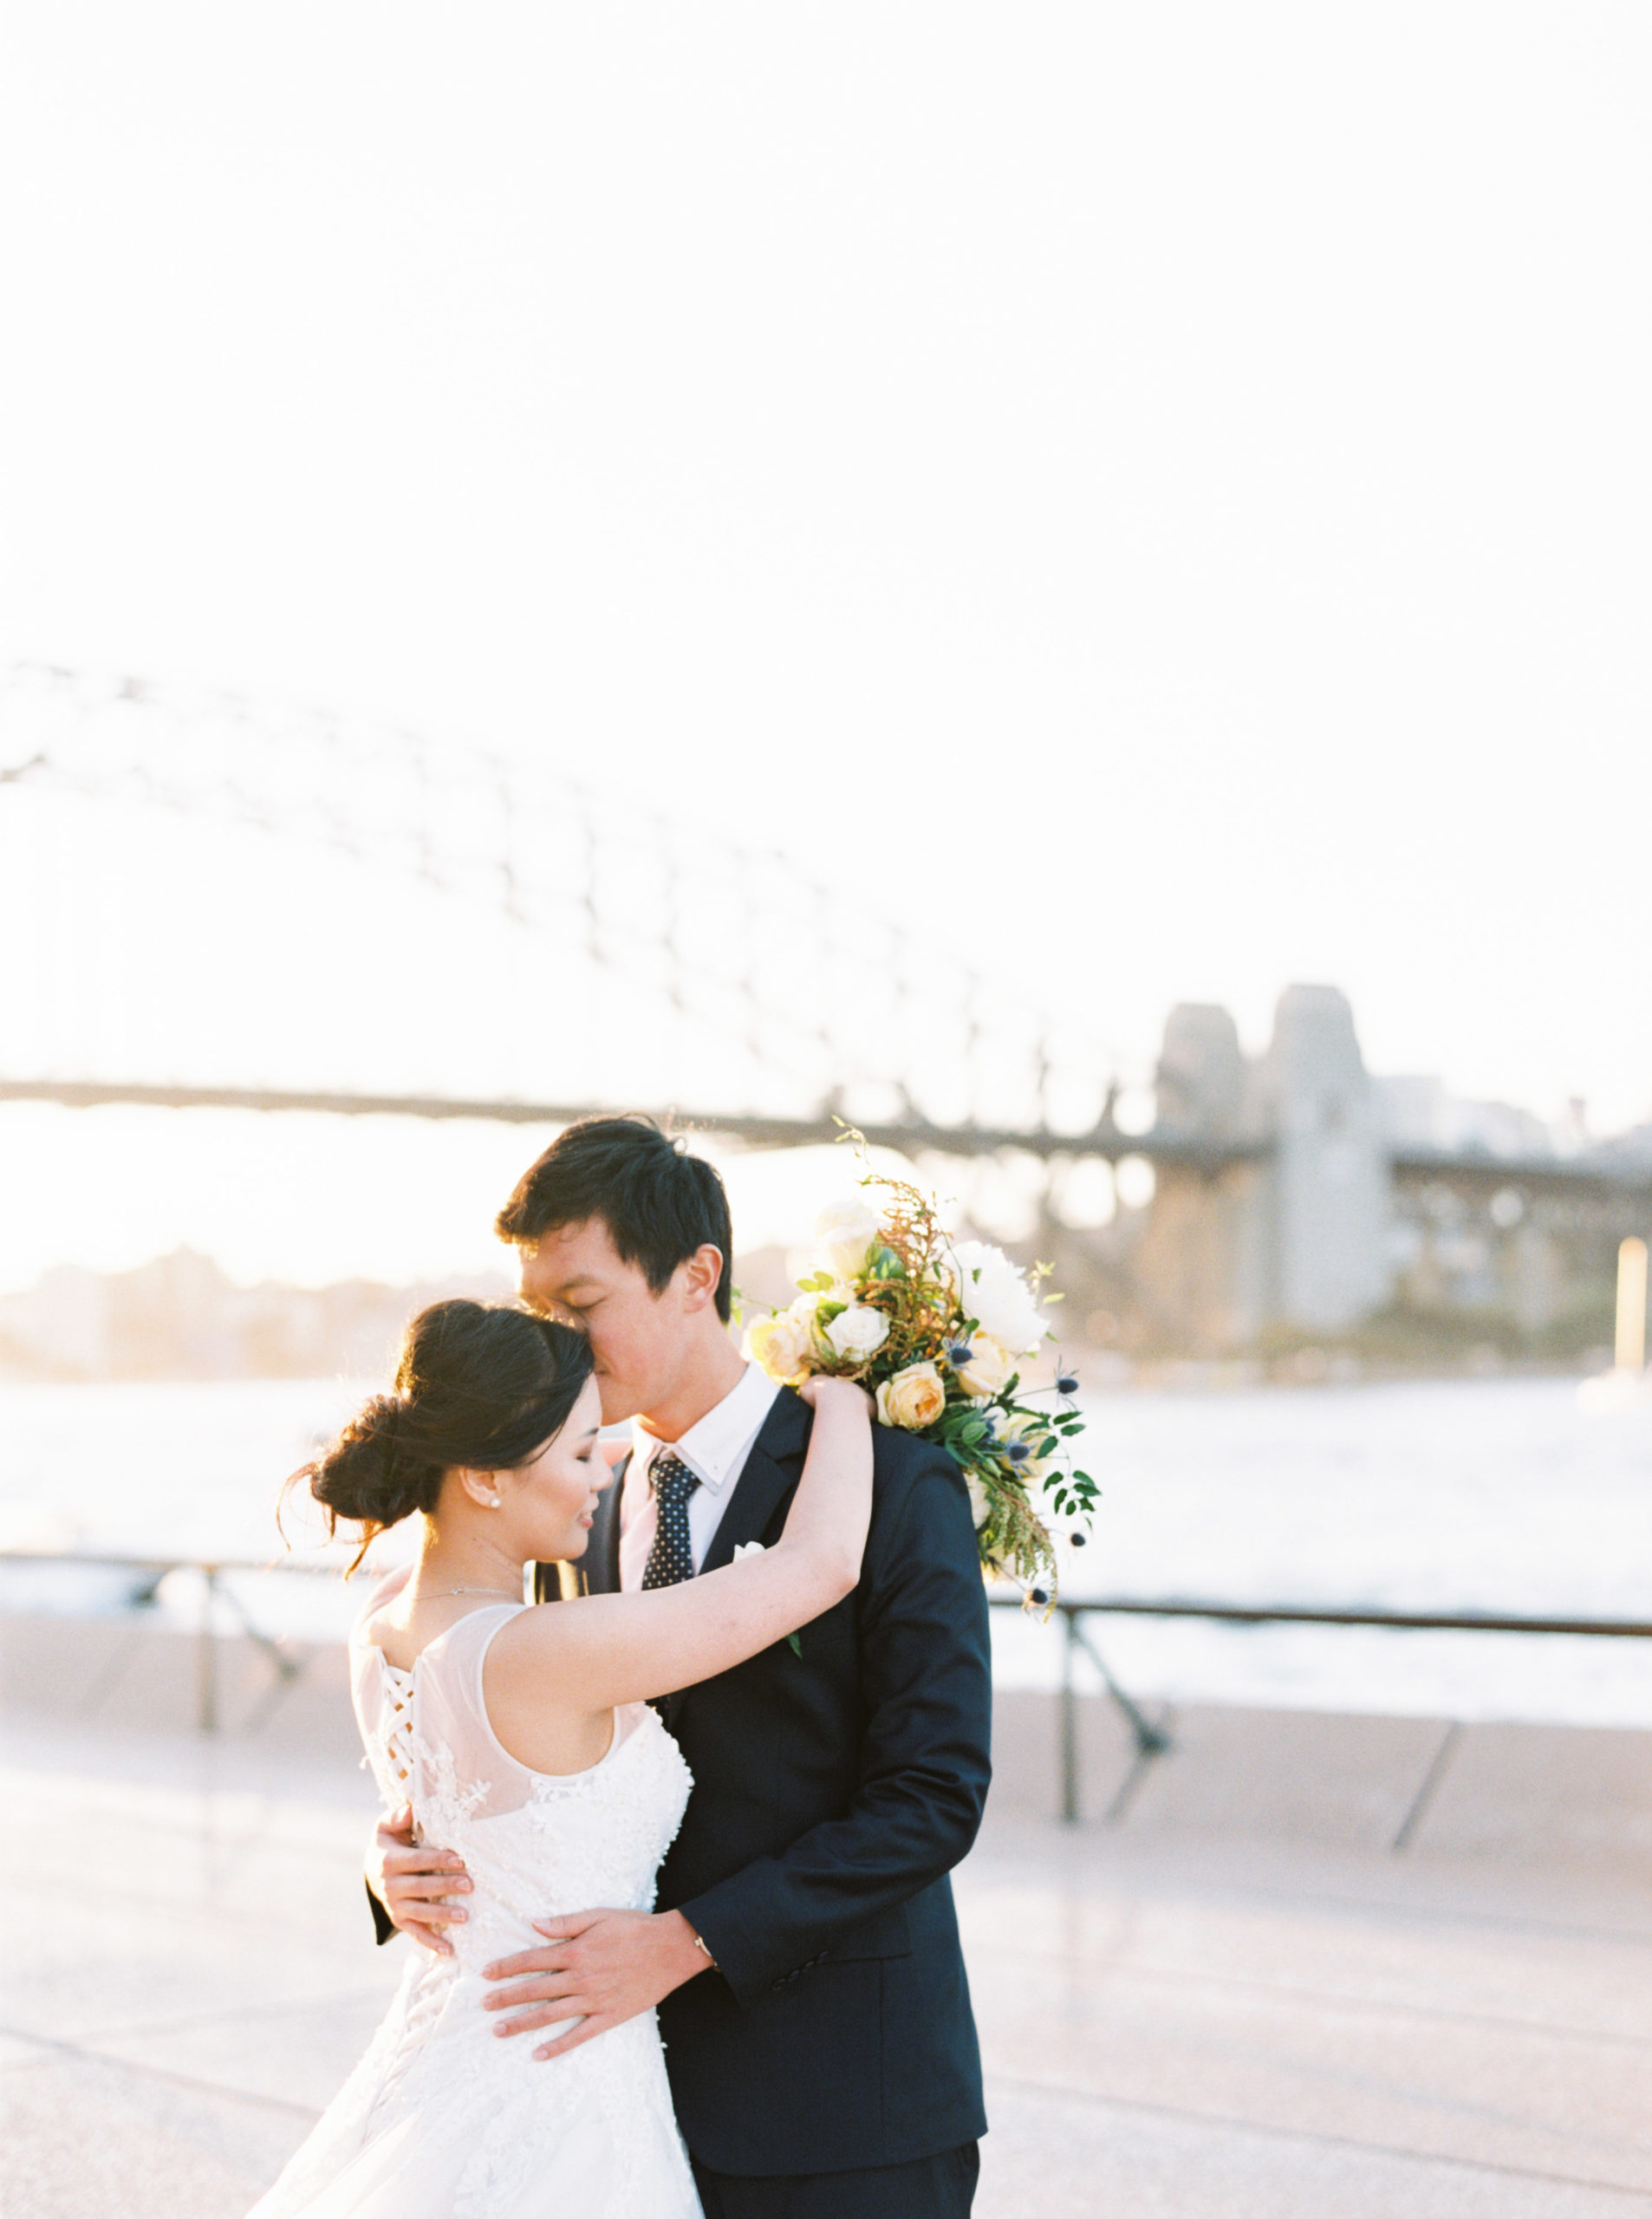 Fine art film pre wedding photo session in Sydney at the Opera House for Singapore couple